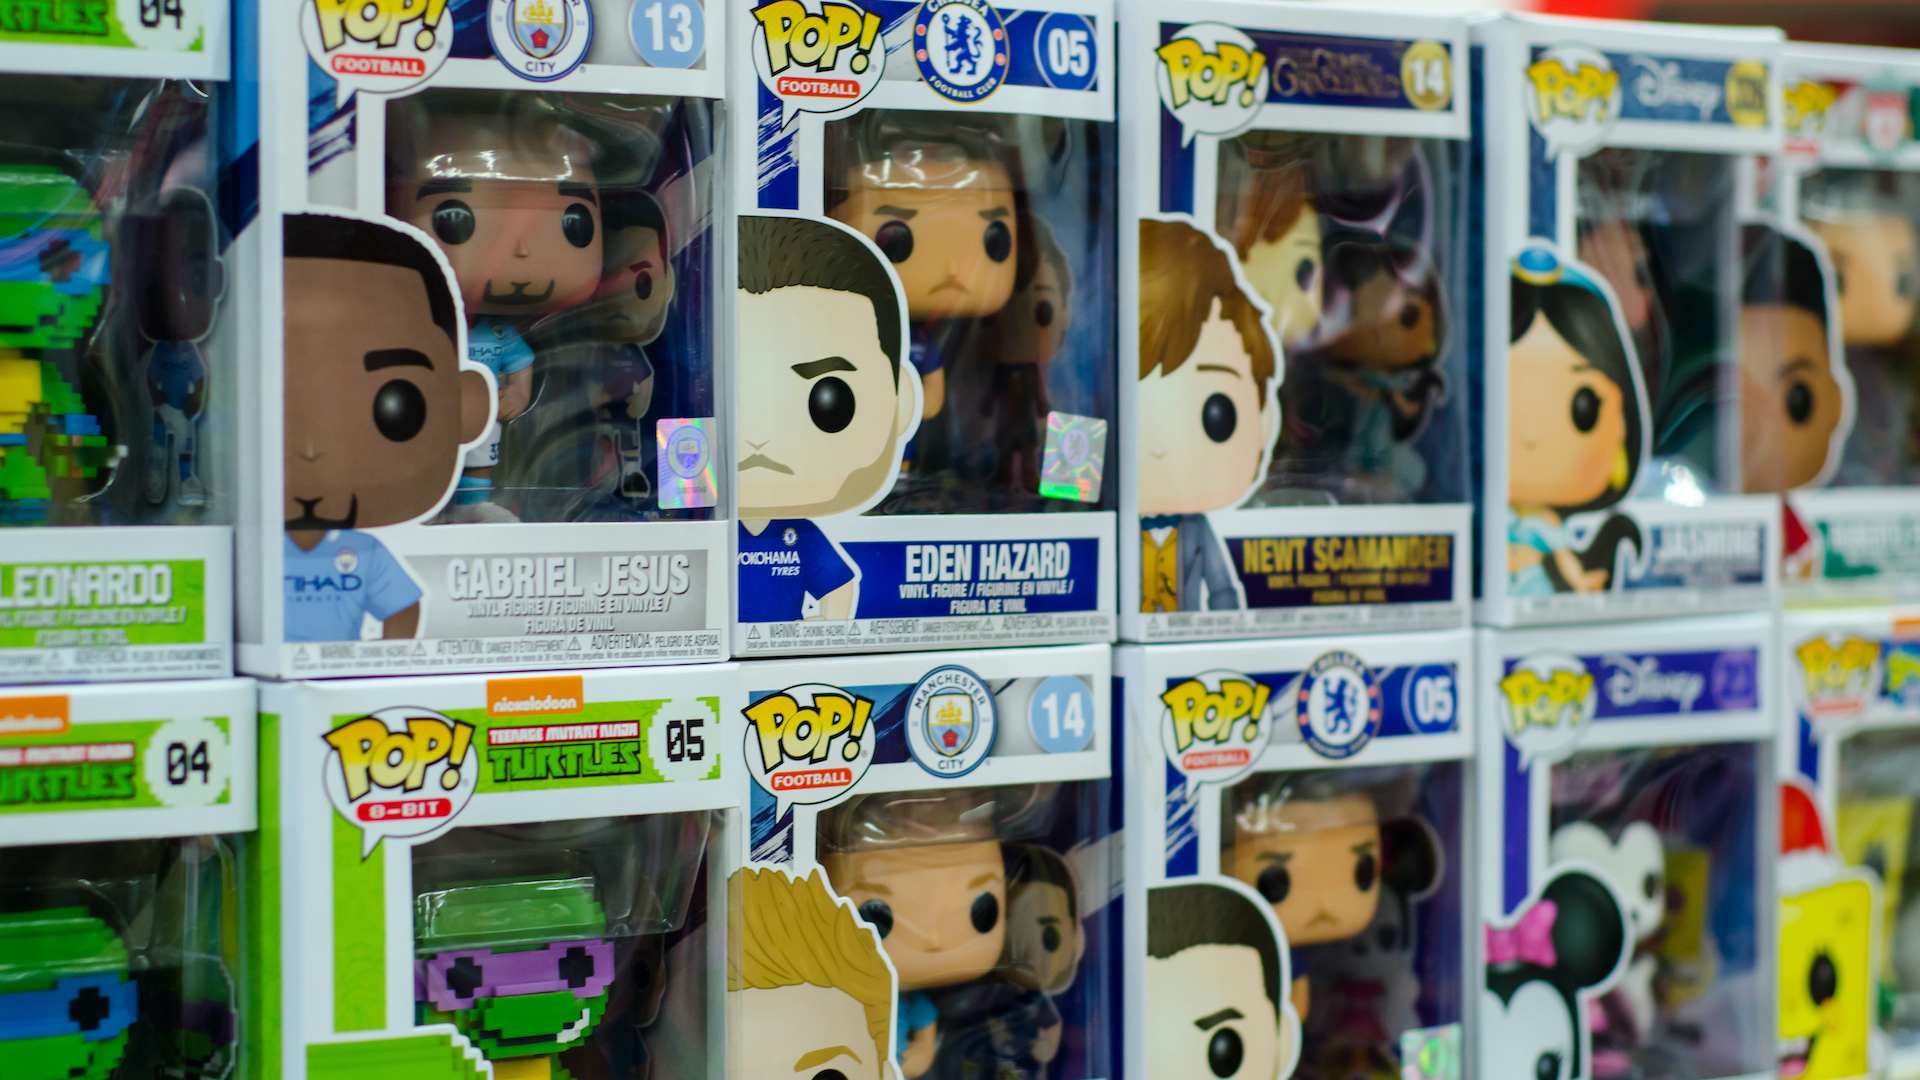 A collection of Funko POP! vinyl figures